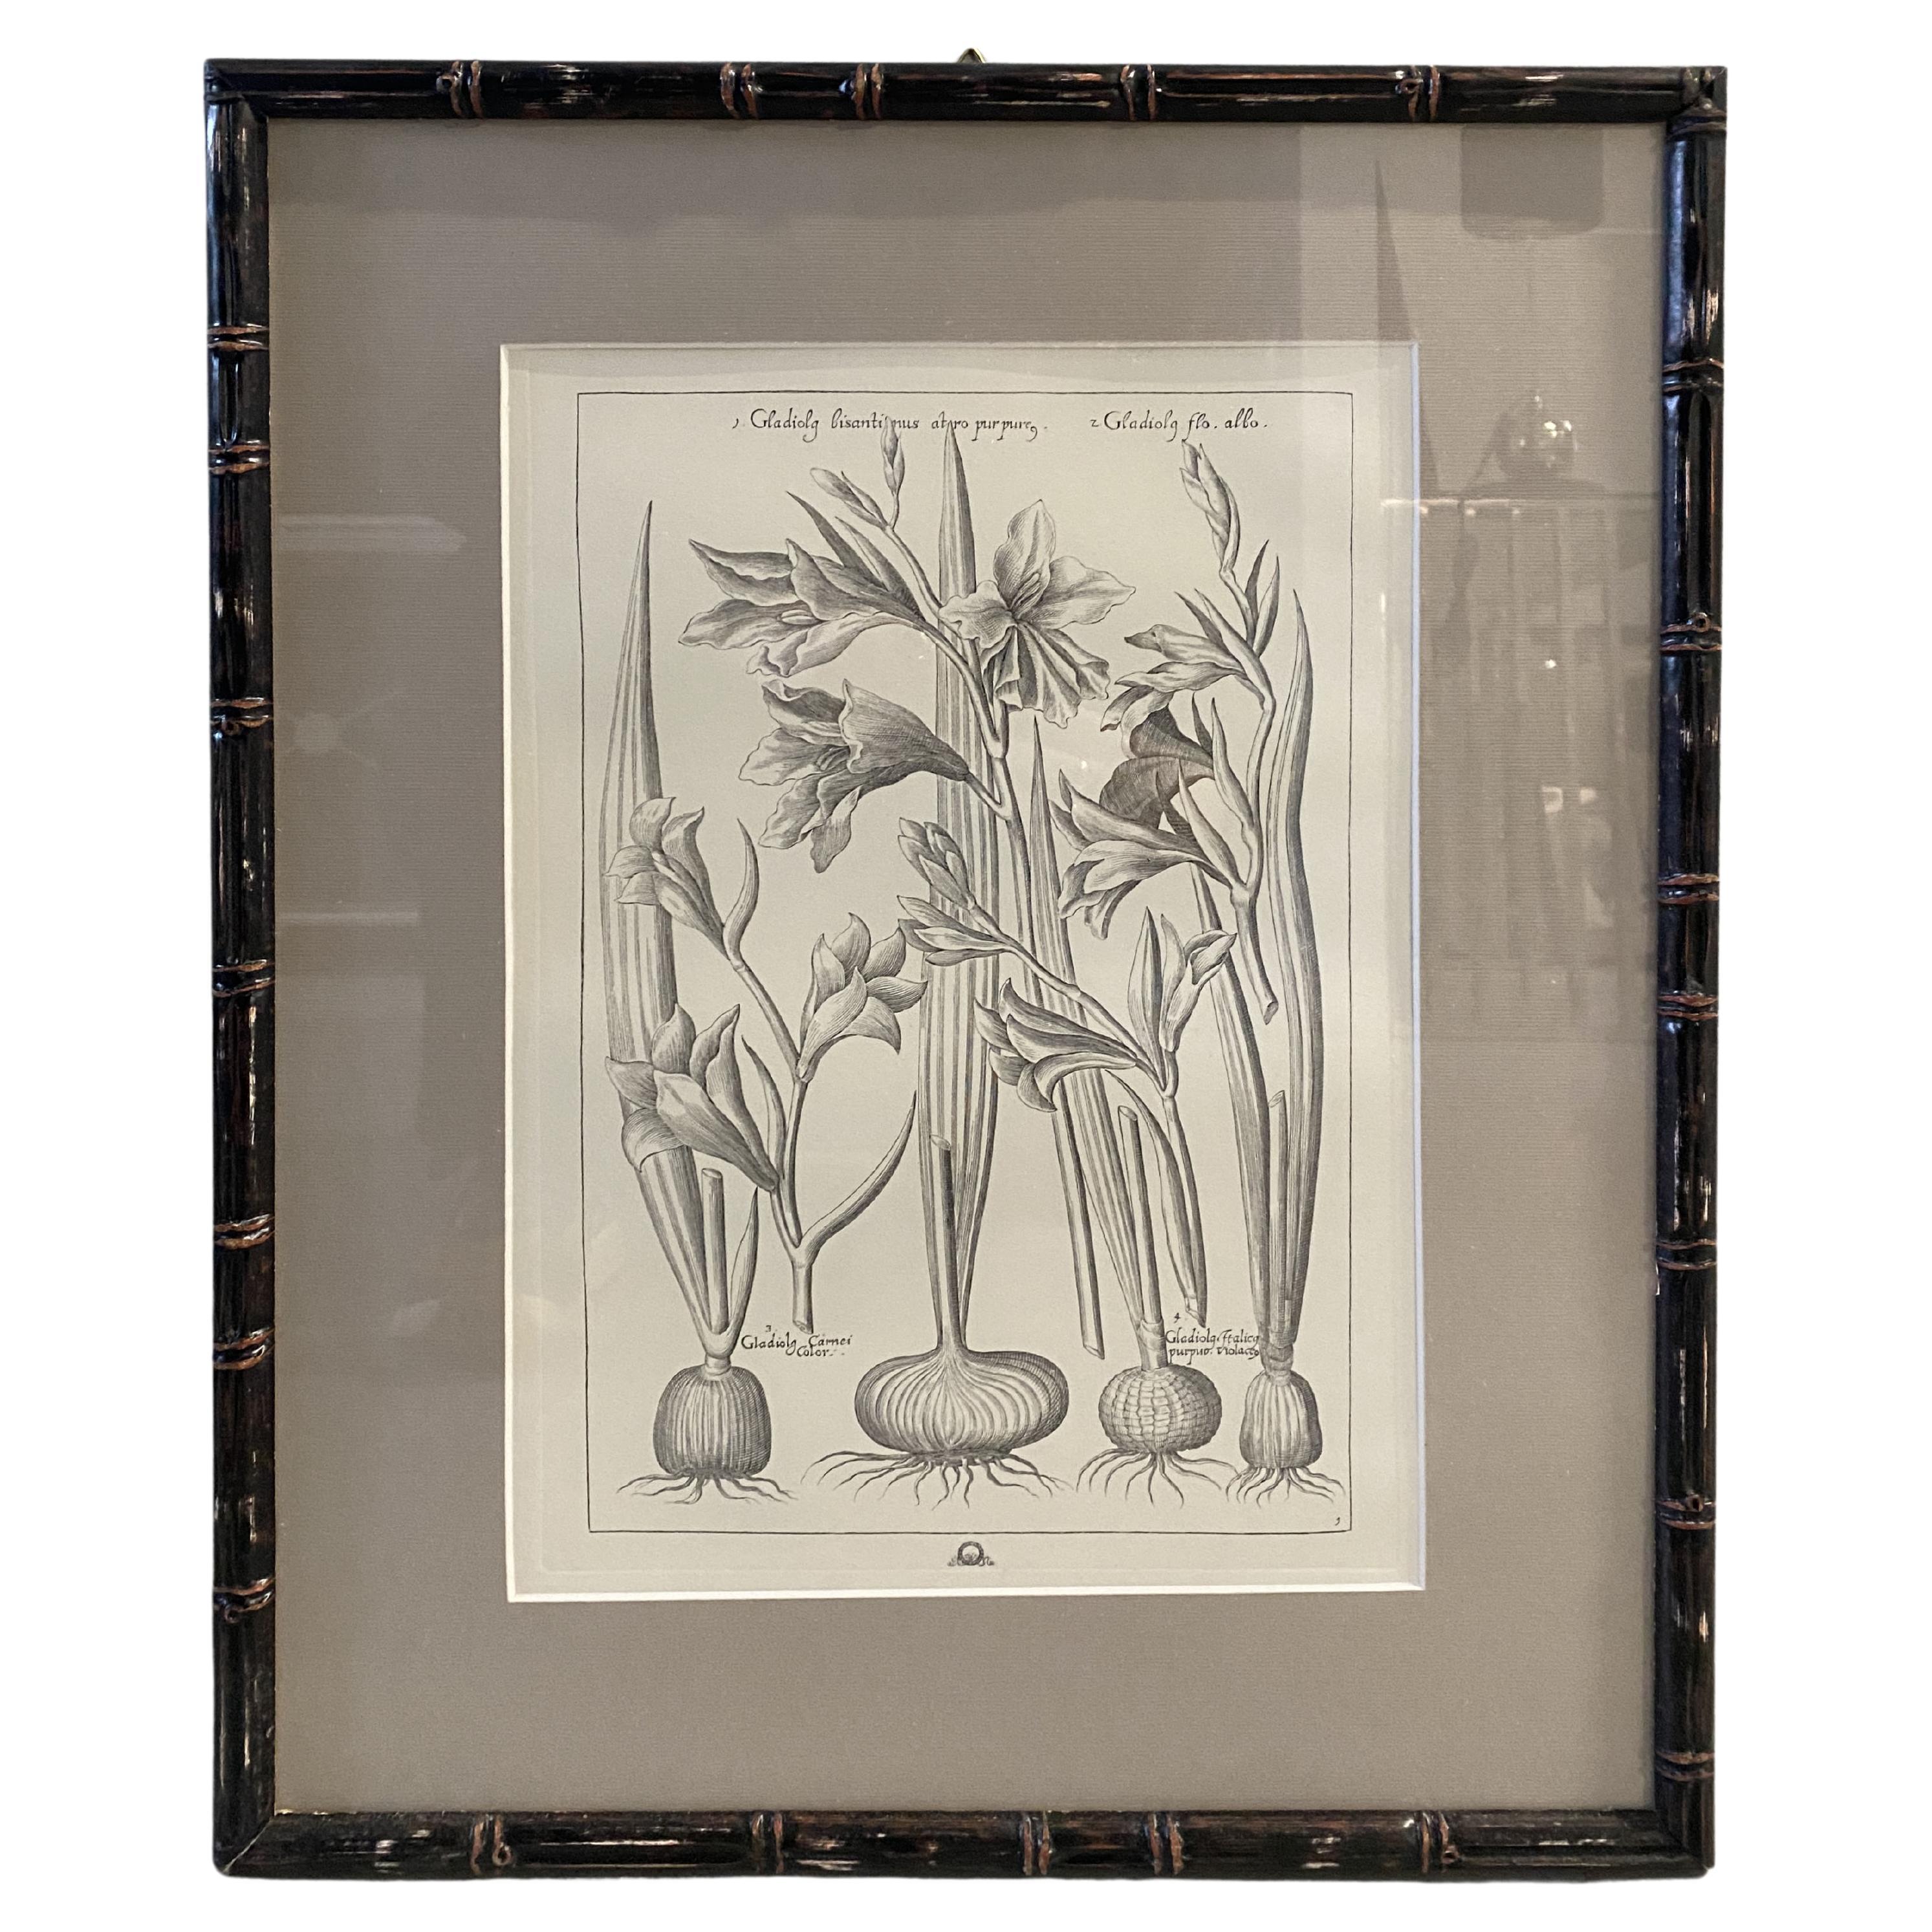 Italian Contemporary "Gladiolus" Black Print with Black Wood Frame 1 of 2